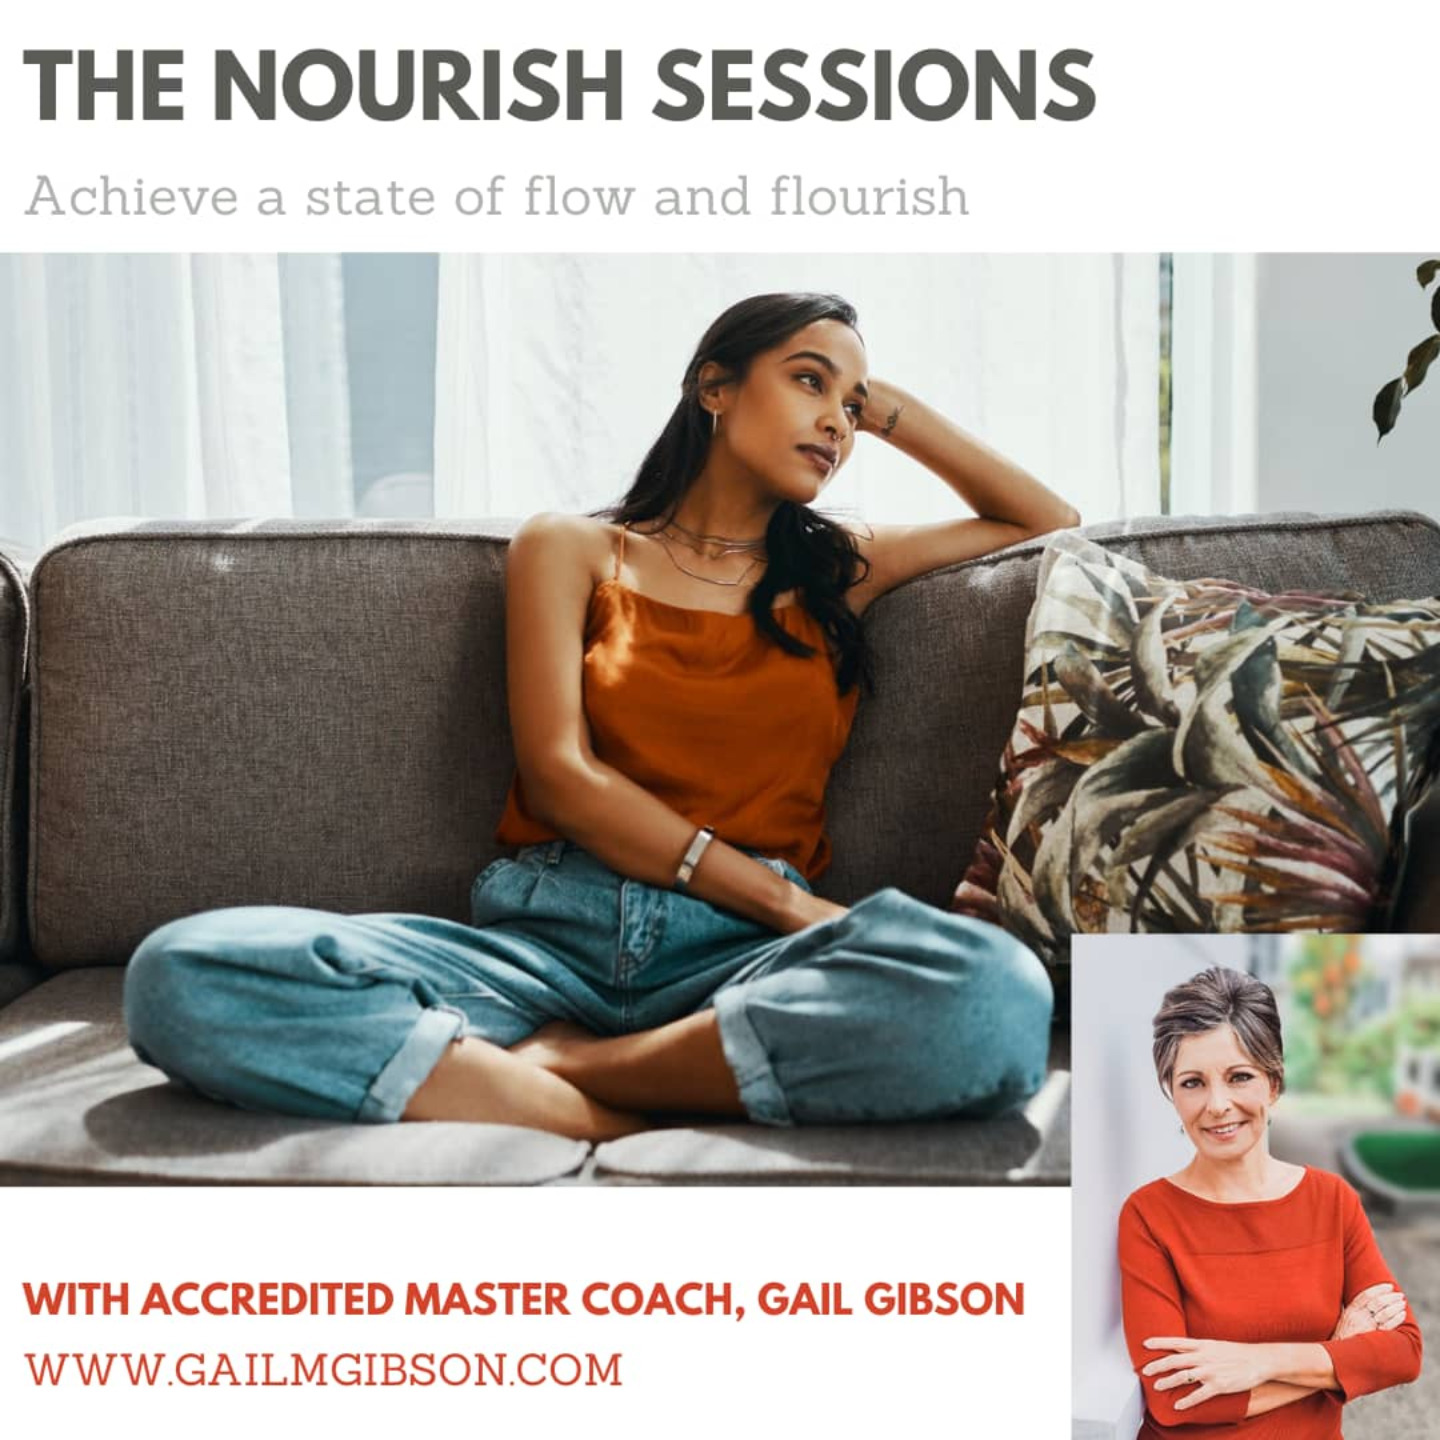 The Nourish Sessions by accredited Master Coach 